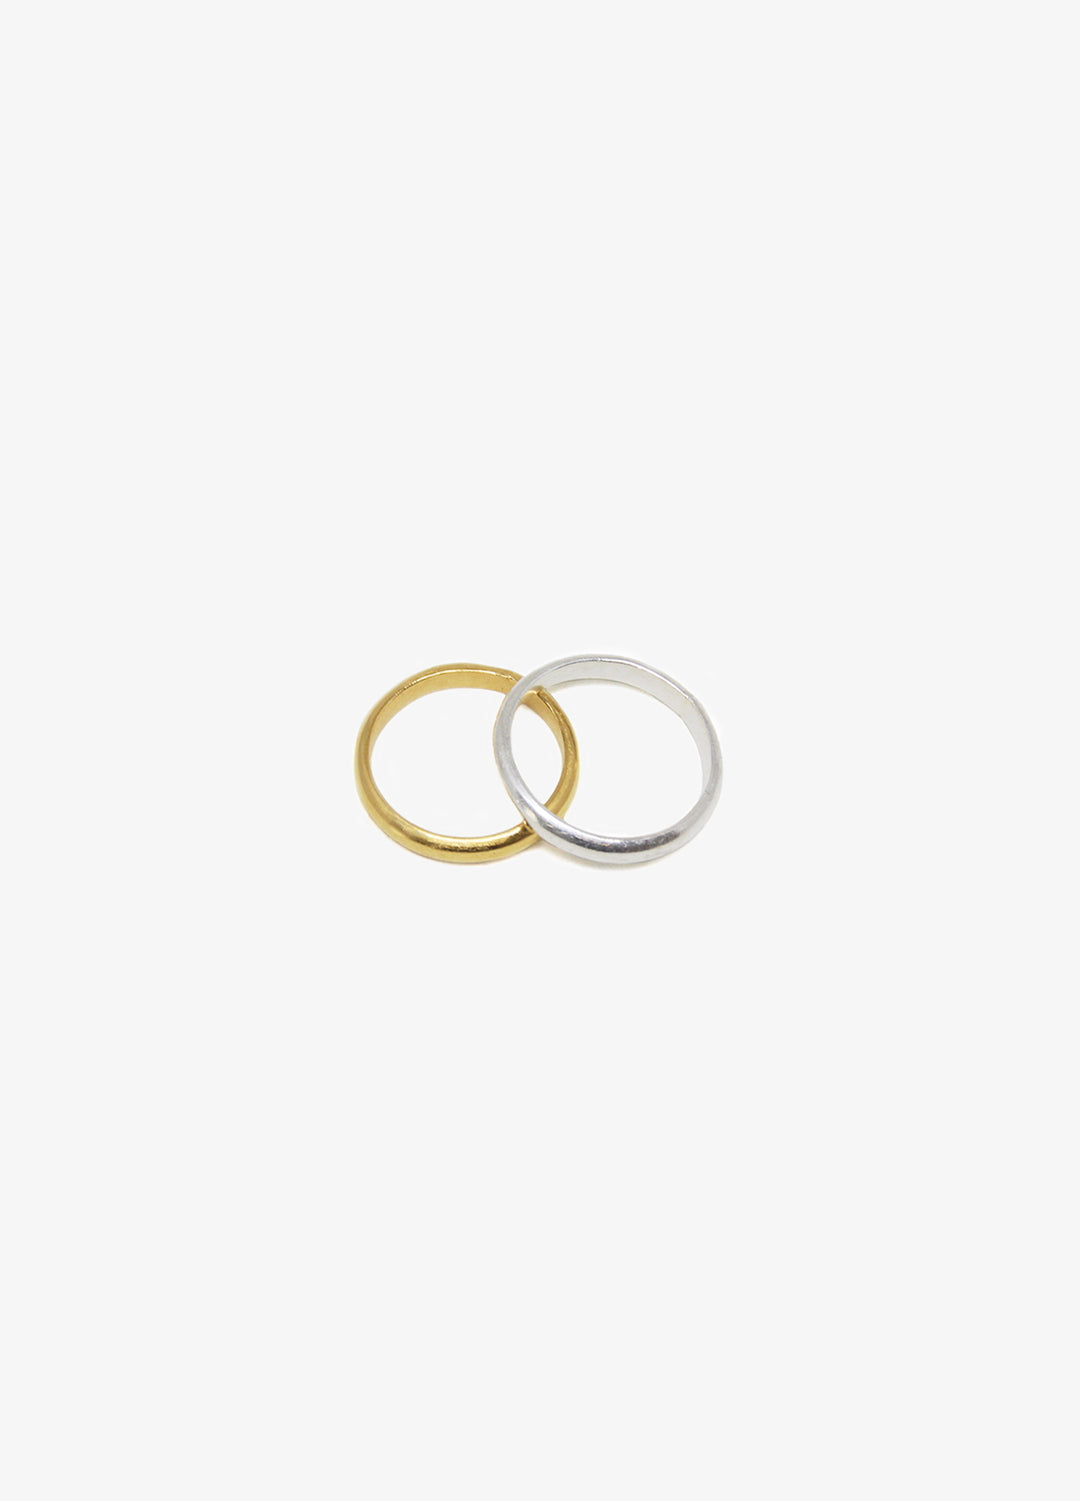 llayers-mens-women-engagement-stackable-silver-gold-band-ring-one001-brooklyn-newyork-F4